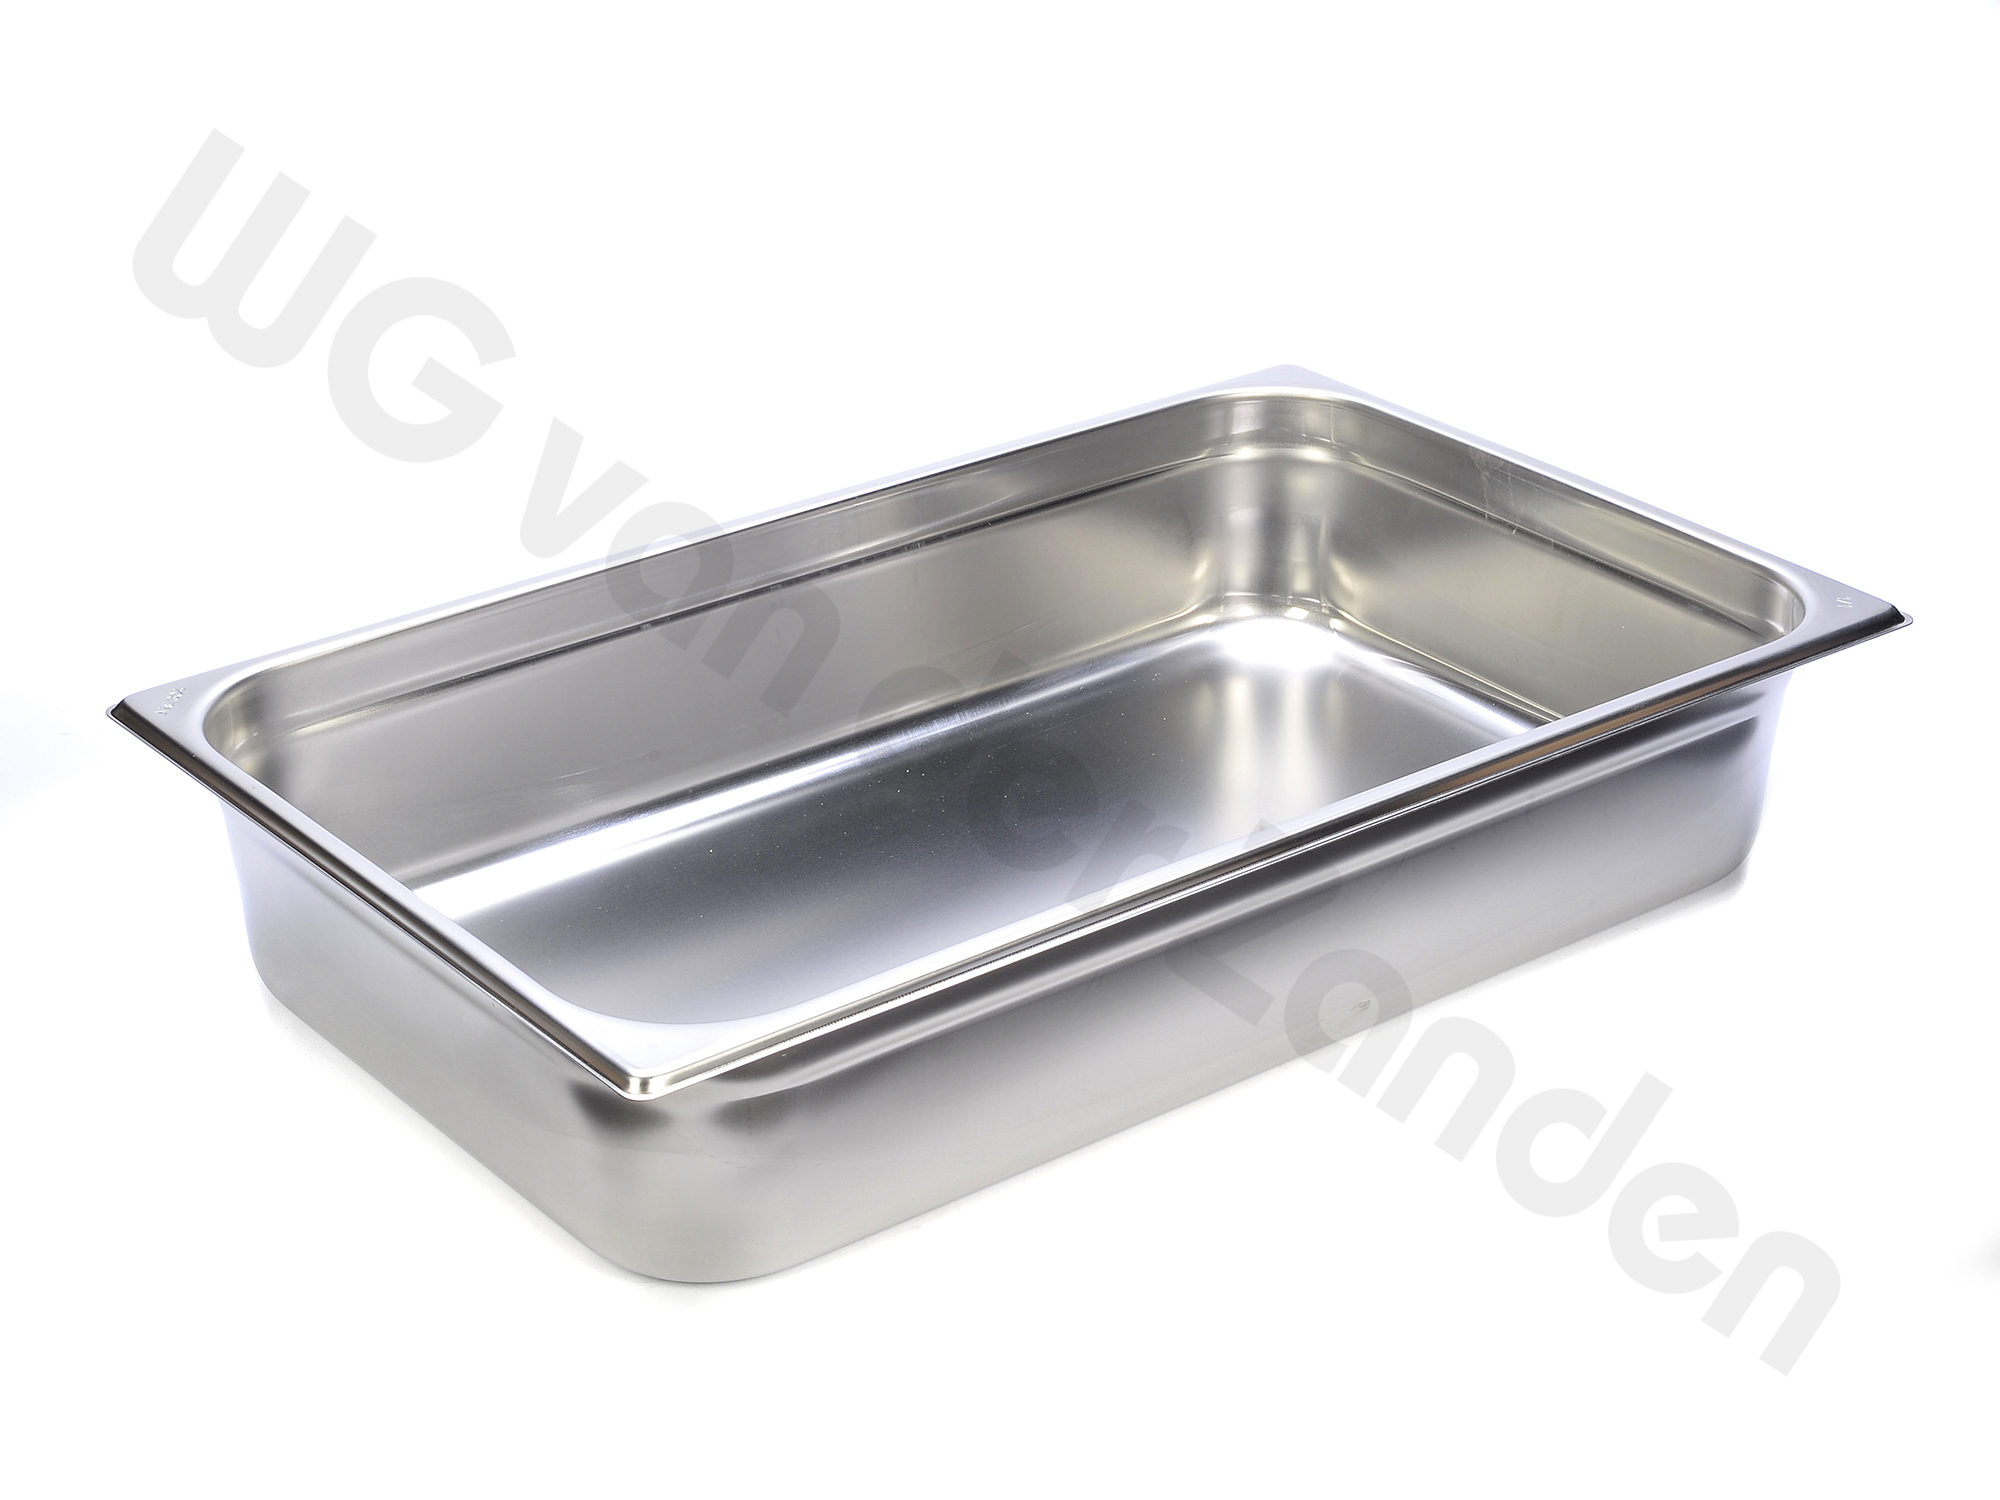 257907 GASTRONORM PAN S/S 1/4 X 15CM